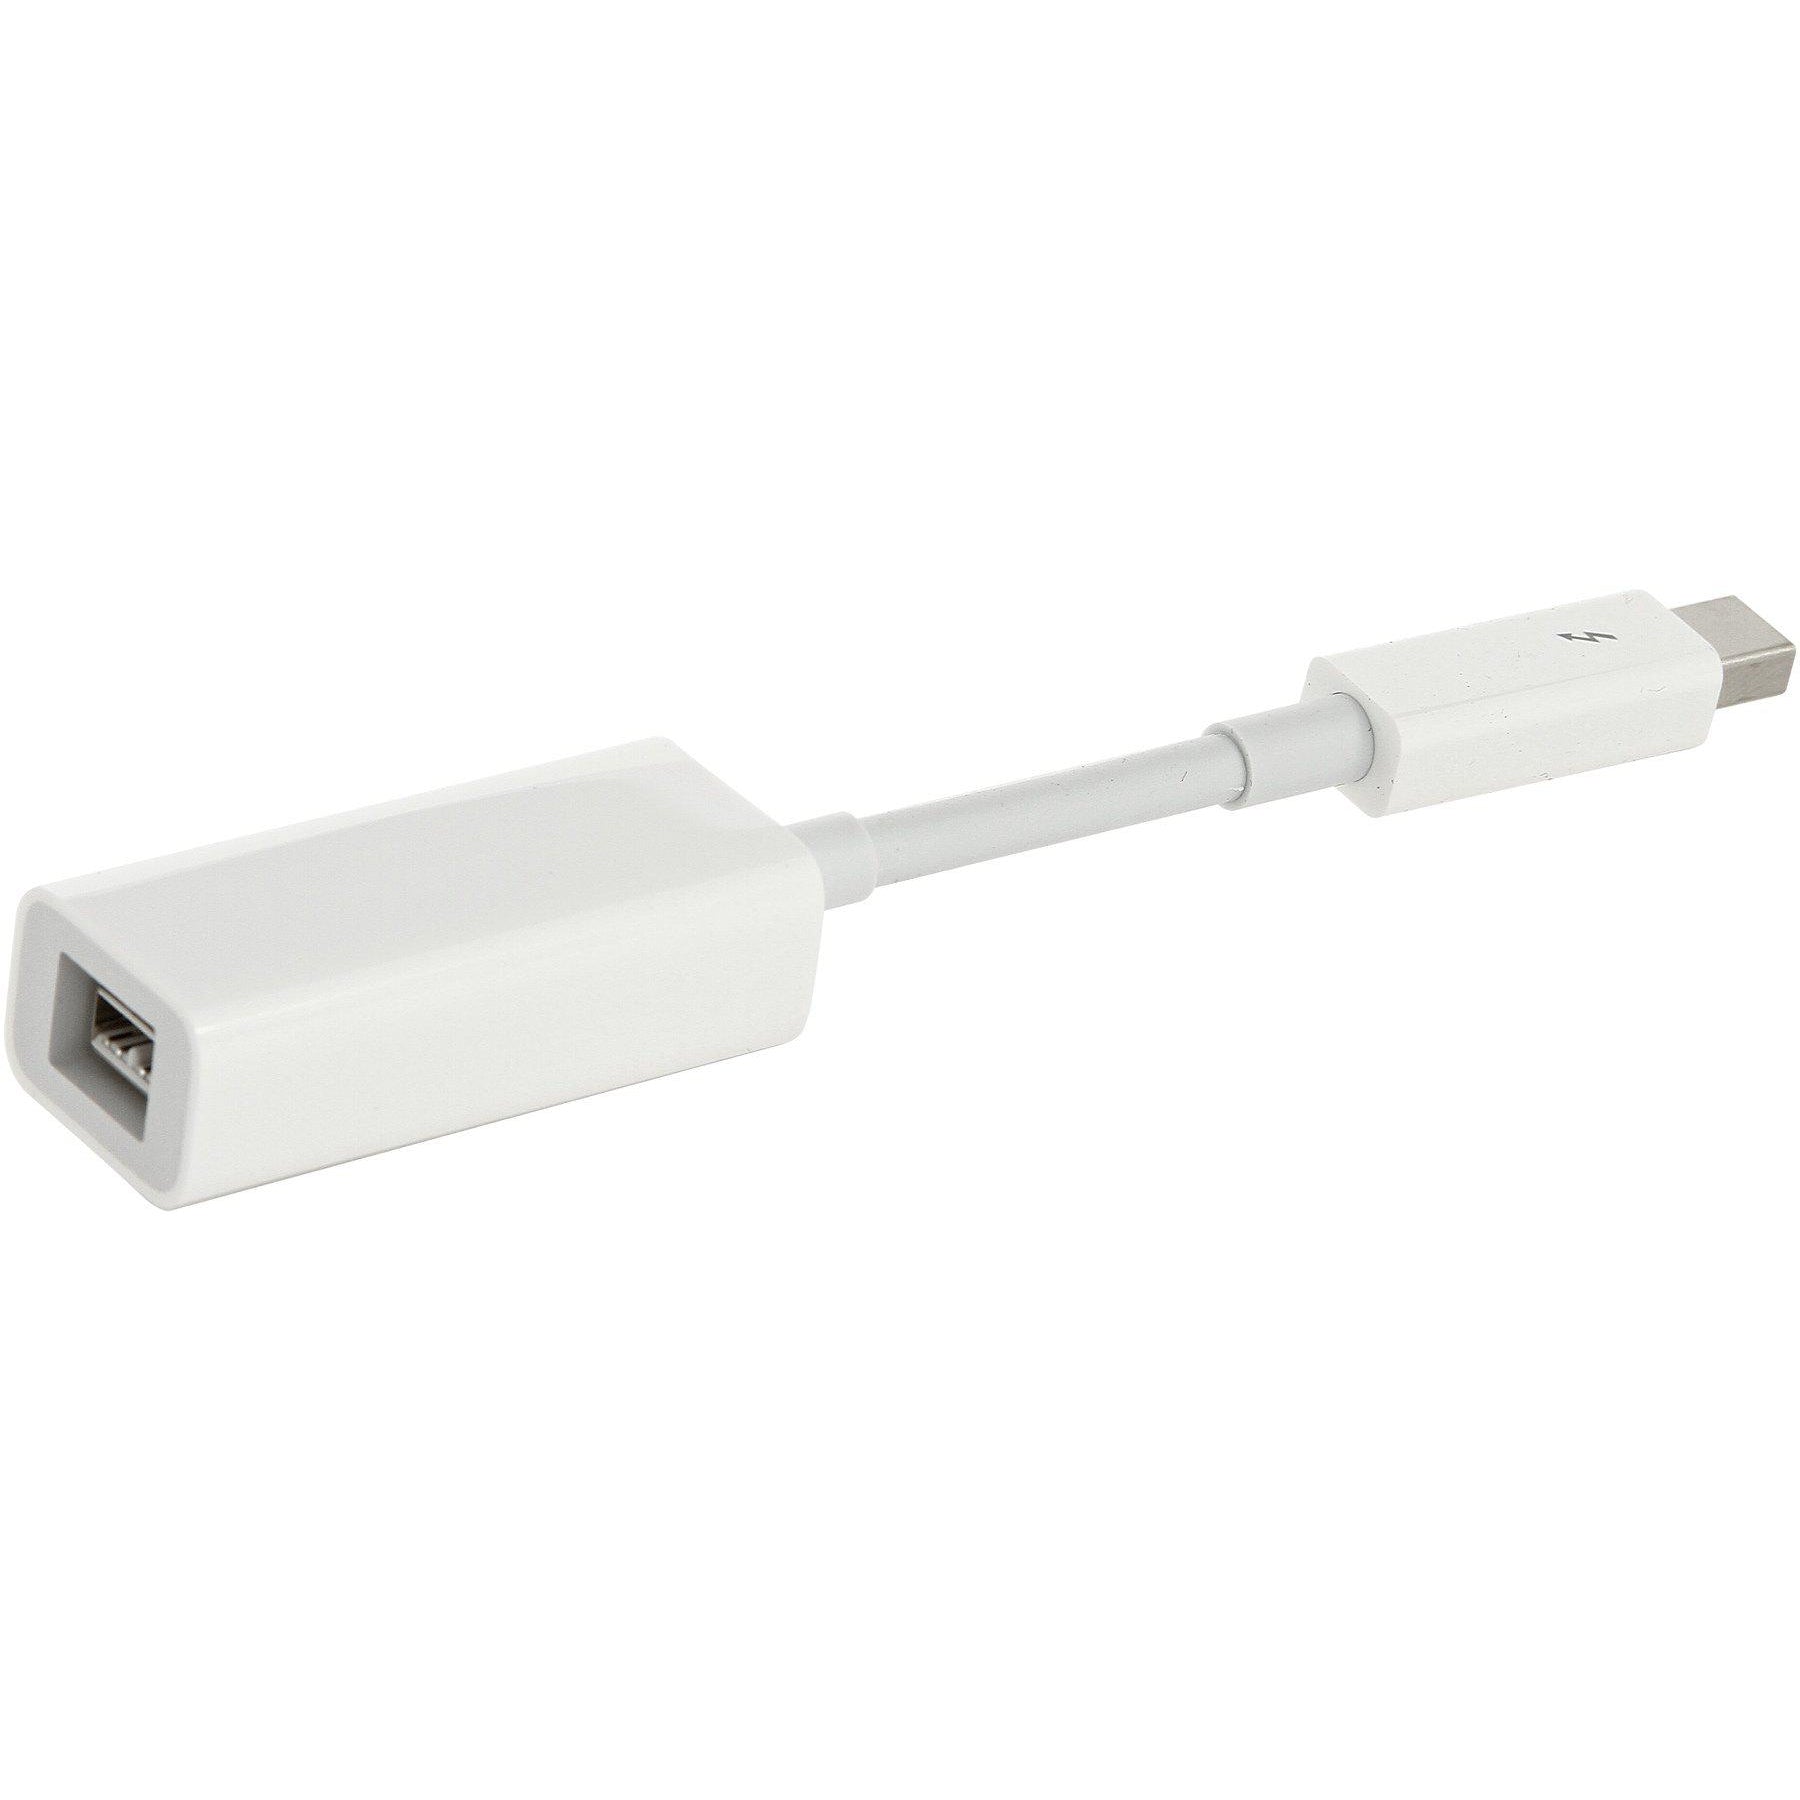 Apple Thunderbolt to FireWire Adapter MD464ZM/A - White